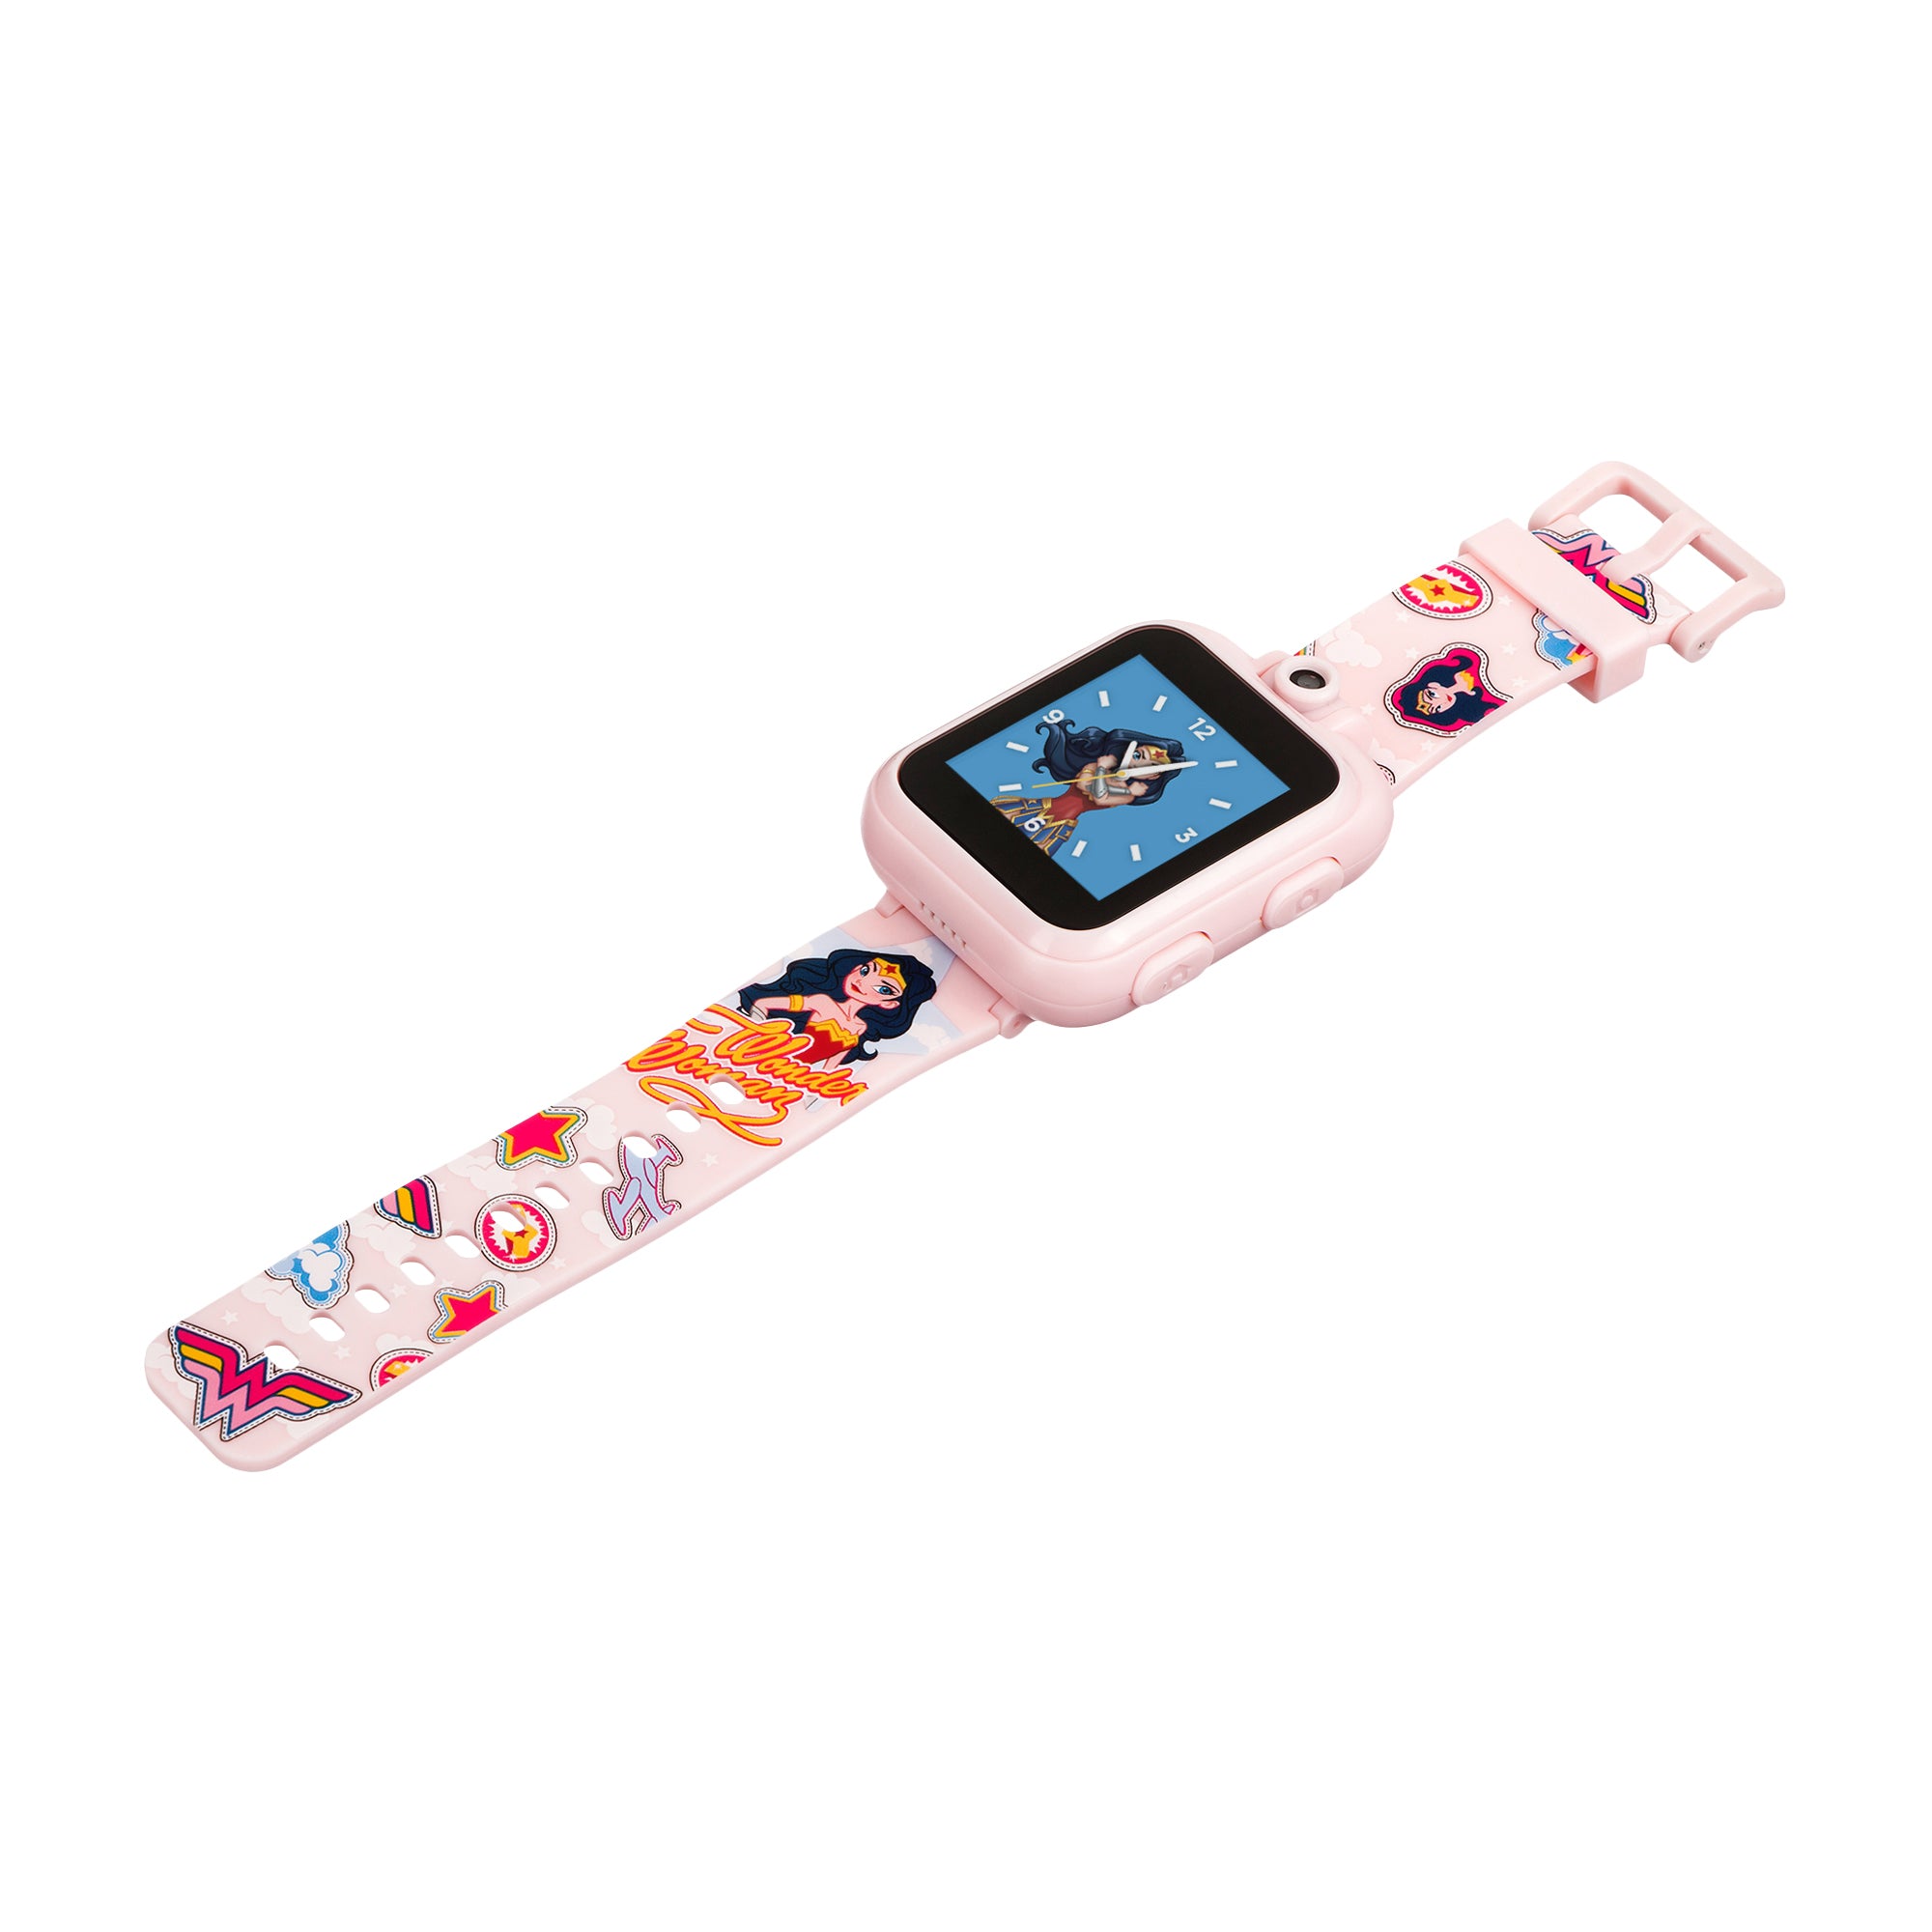 Wonder Woman Smartwatch for Kids by PlayZoom: Blush affordable smart watch